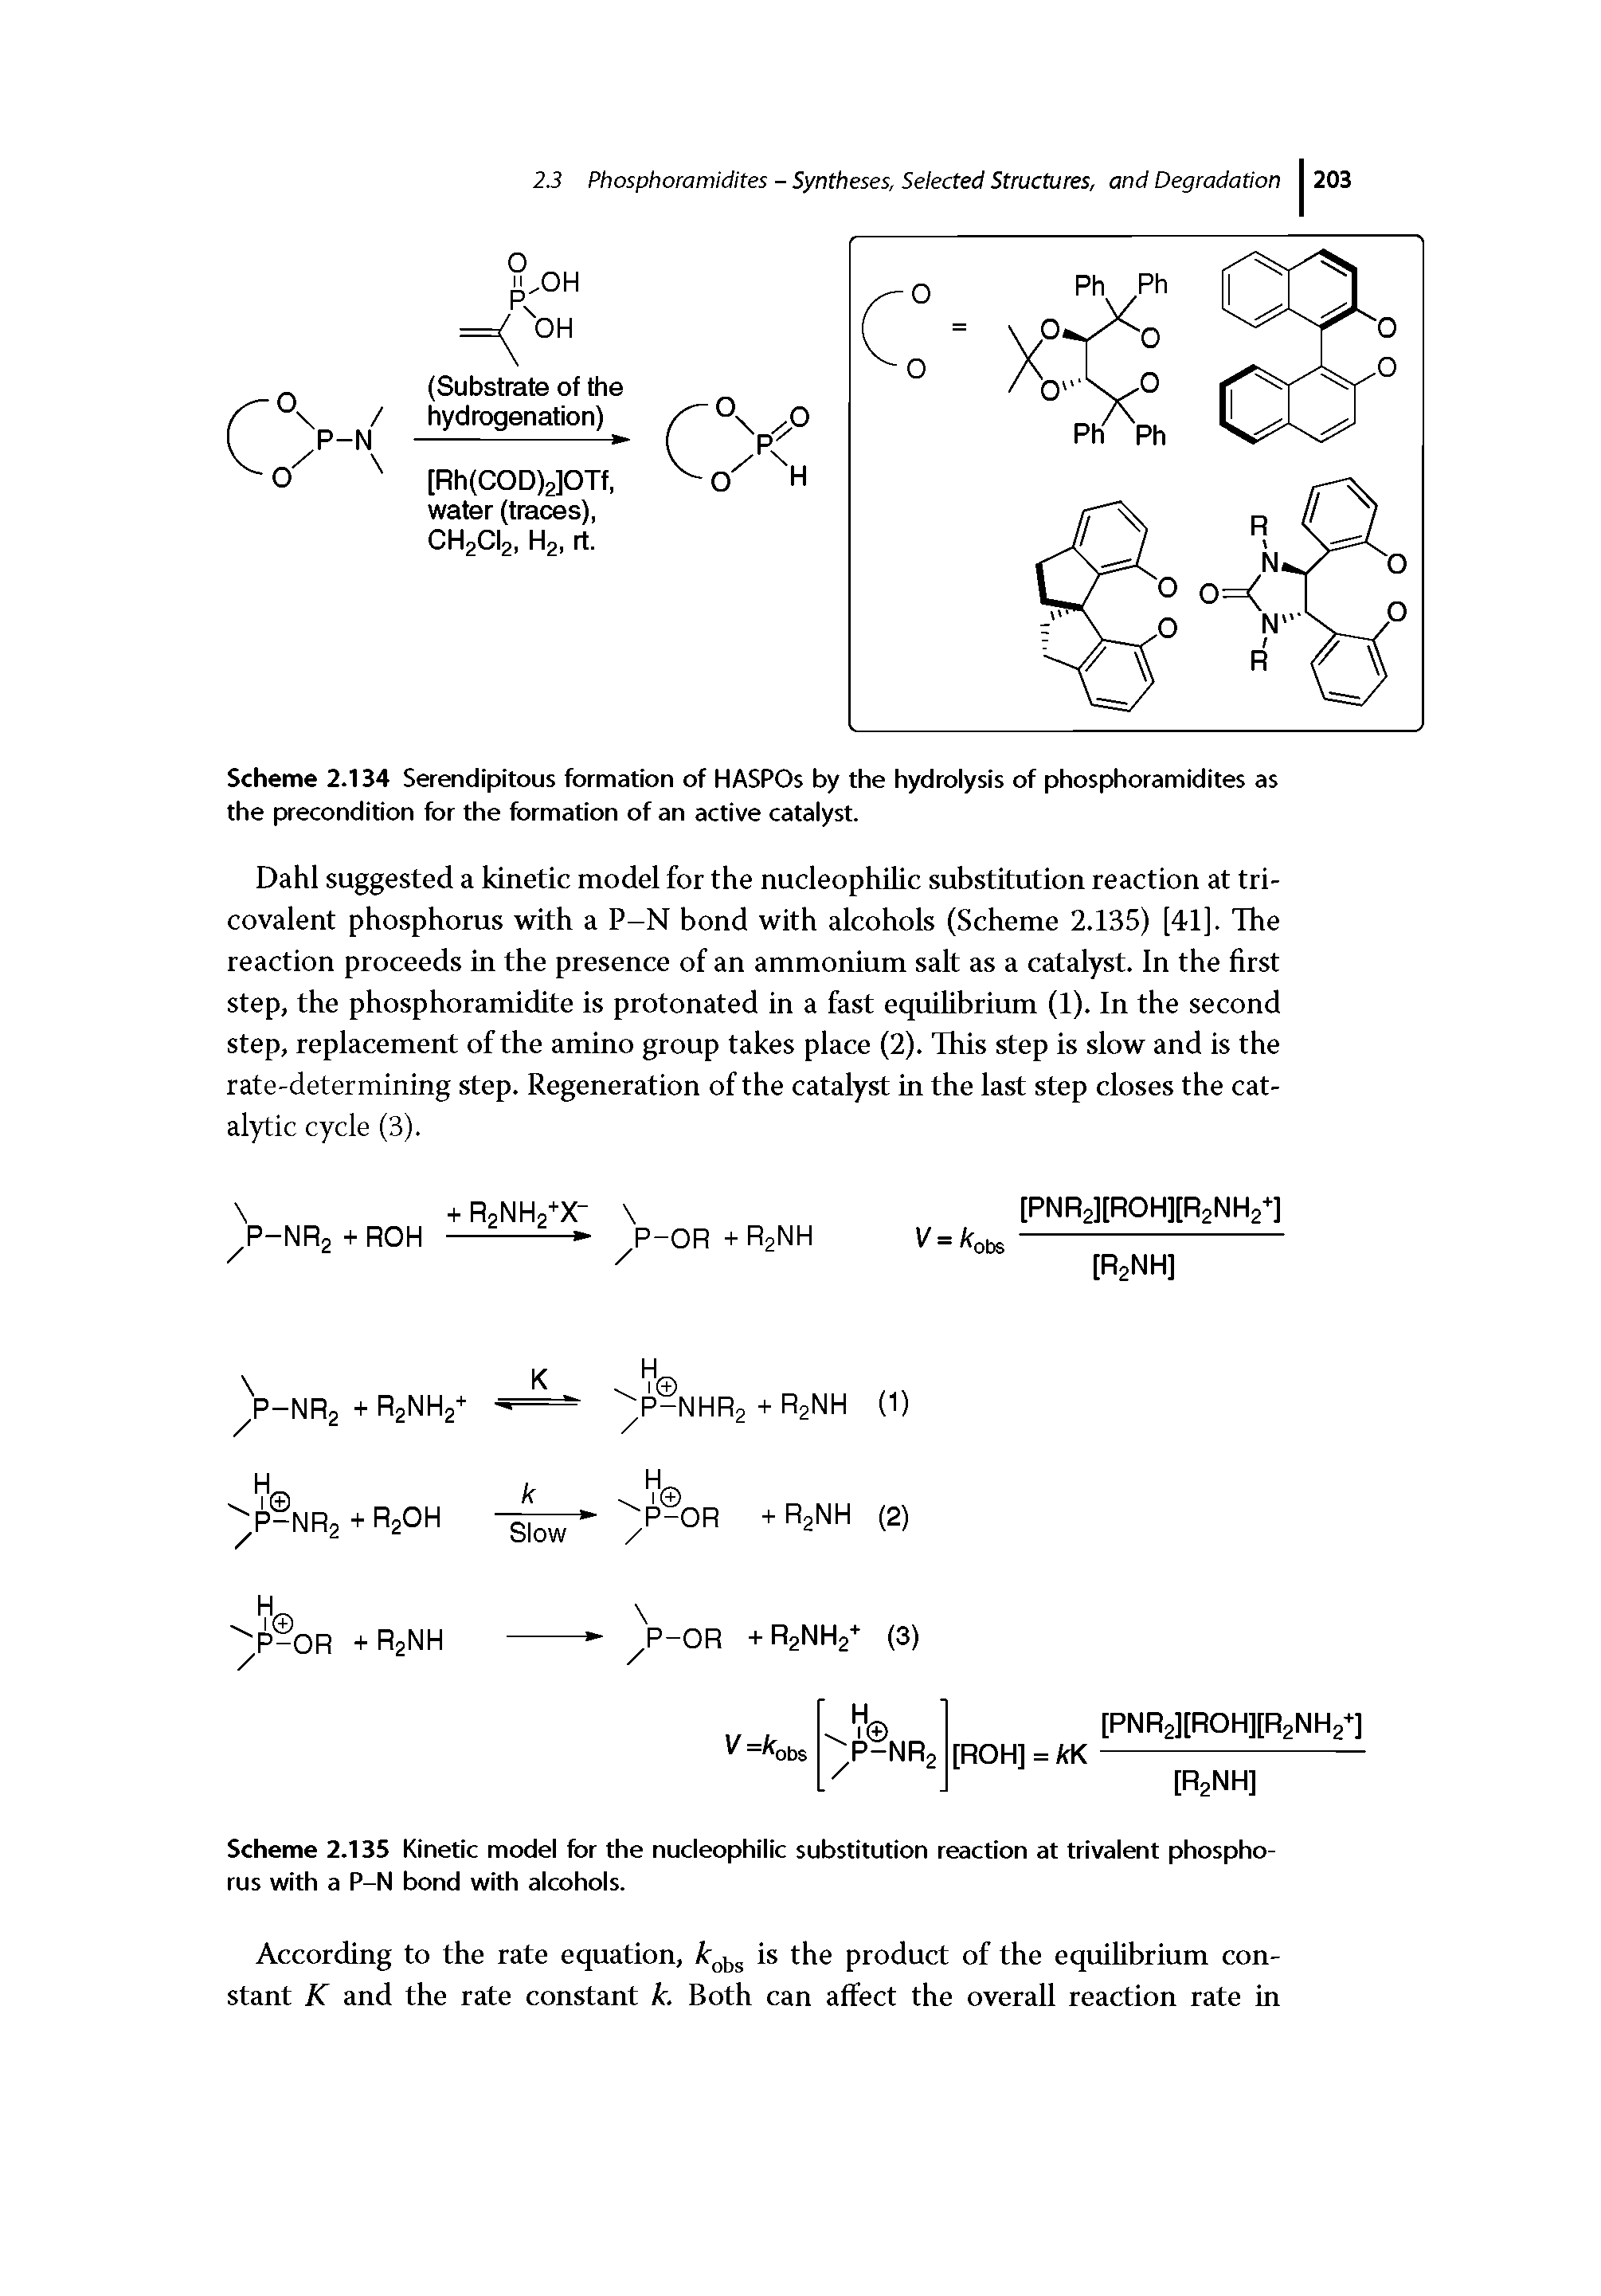 Scheme 2.135 Kinetic model for the nucleophilic substitution reaction at trivalent phosphorus with a P-N bond with alcohols.